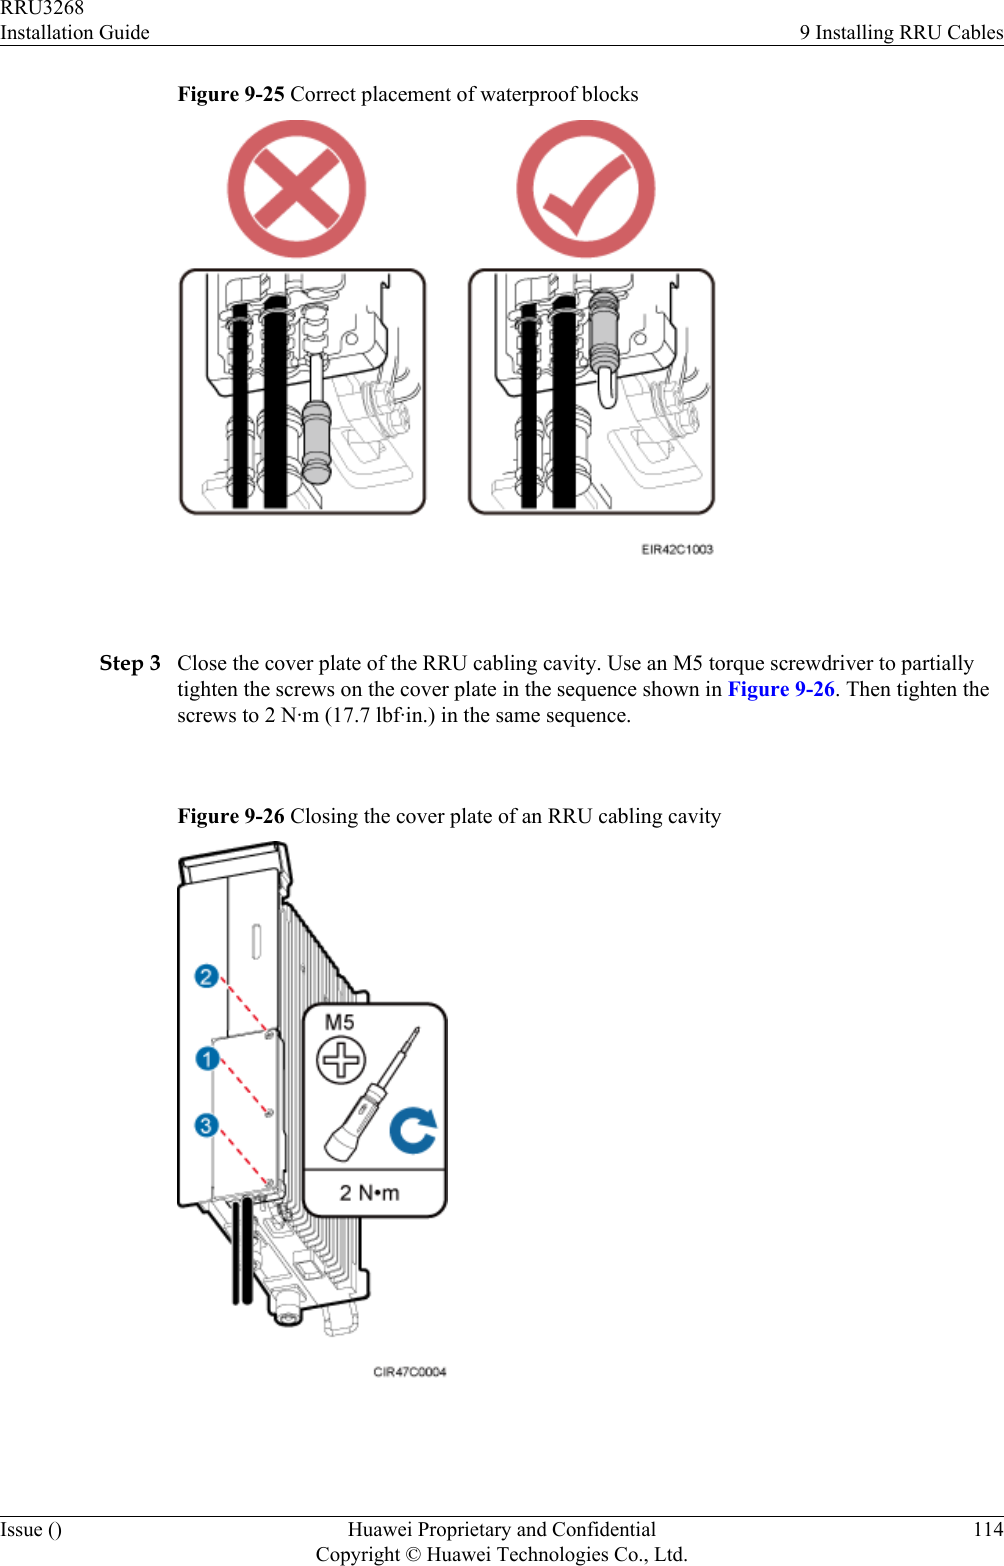 Figure 9-25 Correct placement of waterproof blocks Step 3 Close the cover plate of the RRU cabling cavity. Use an M5 torque screwdriver to partiallytighten the screws on the cover plate in the sequence shown in Figure 9-26. Then tighten thescrews to 2 N·m (17.7 lbf·in.) in the same sequence.Figure 9-26 Closing the cover plate of an RRU cabling cavity RRU3268Installation Guide 9 Installing RRU CablesIssue () Huawei Proprietary and ConfidentialCopyright © Huawei Technologies Co., Ltd.114